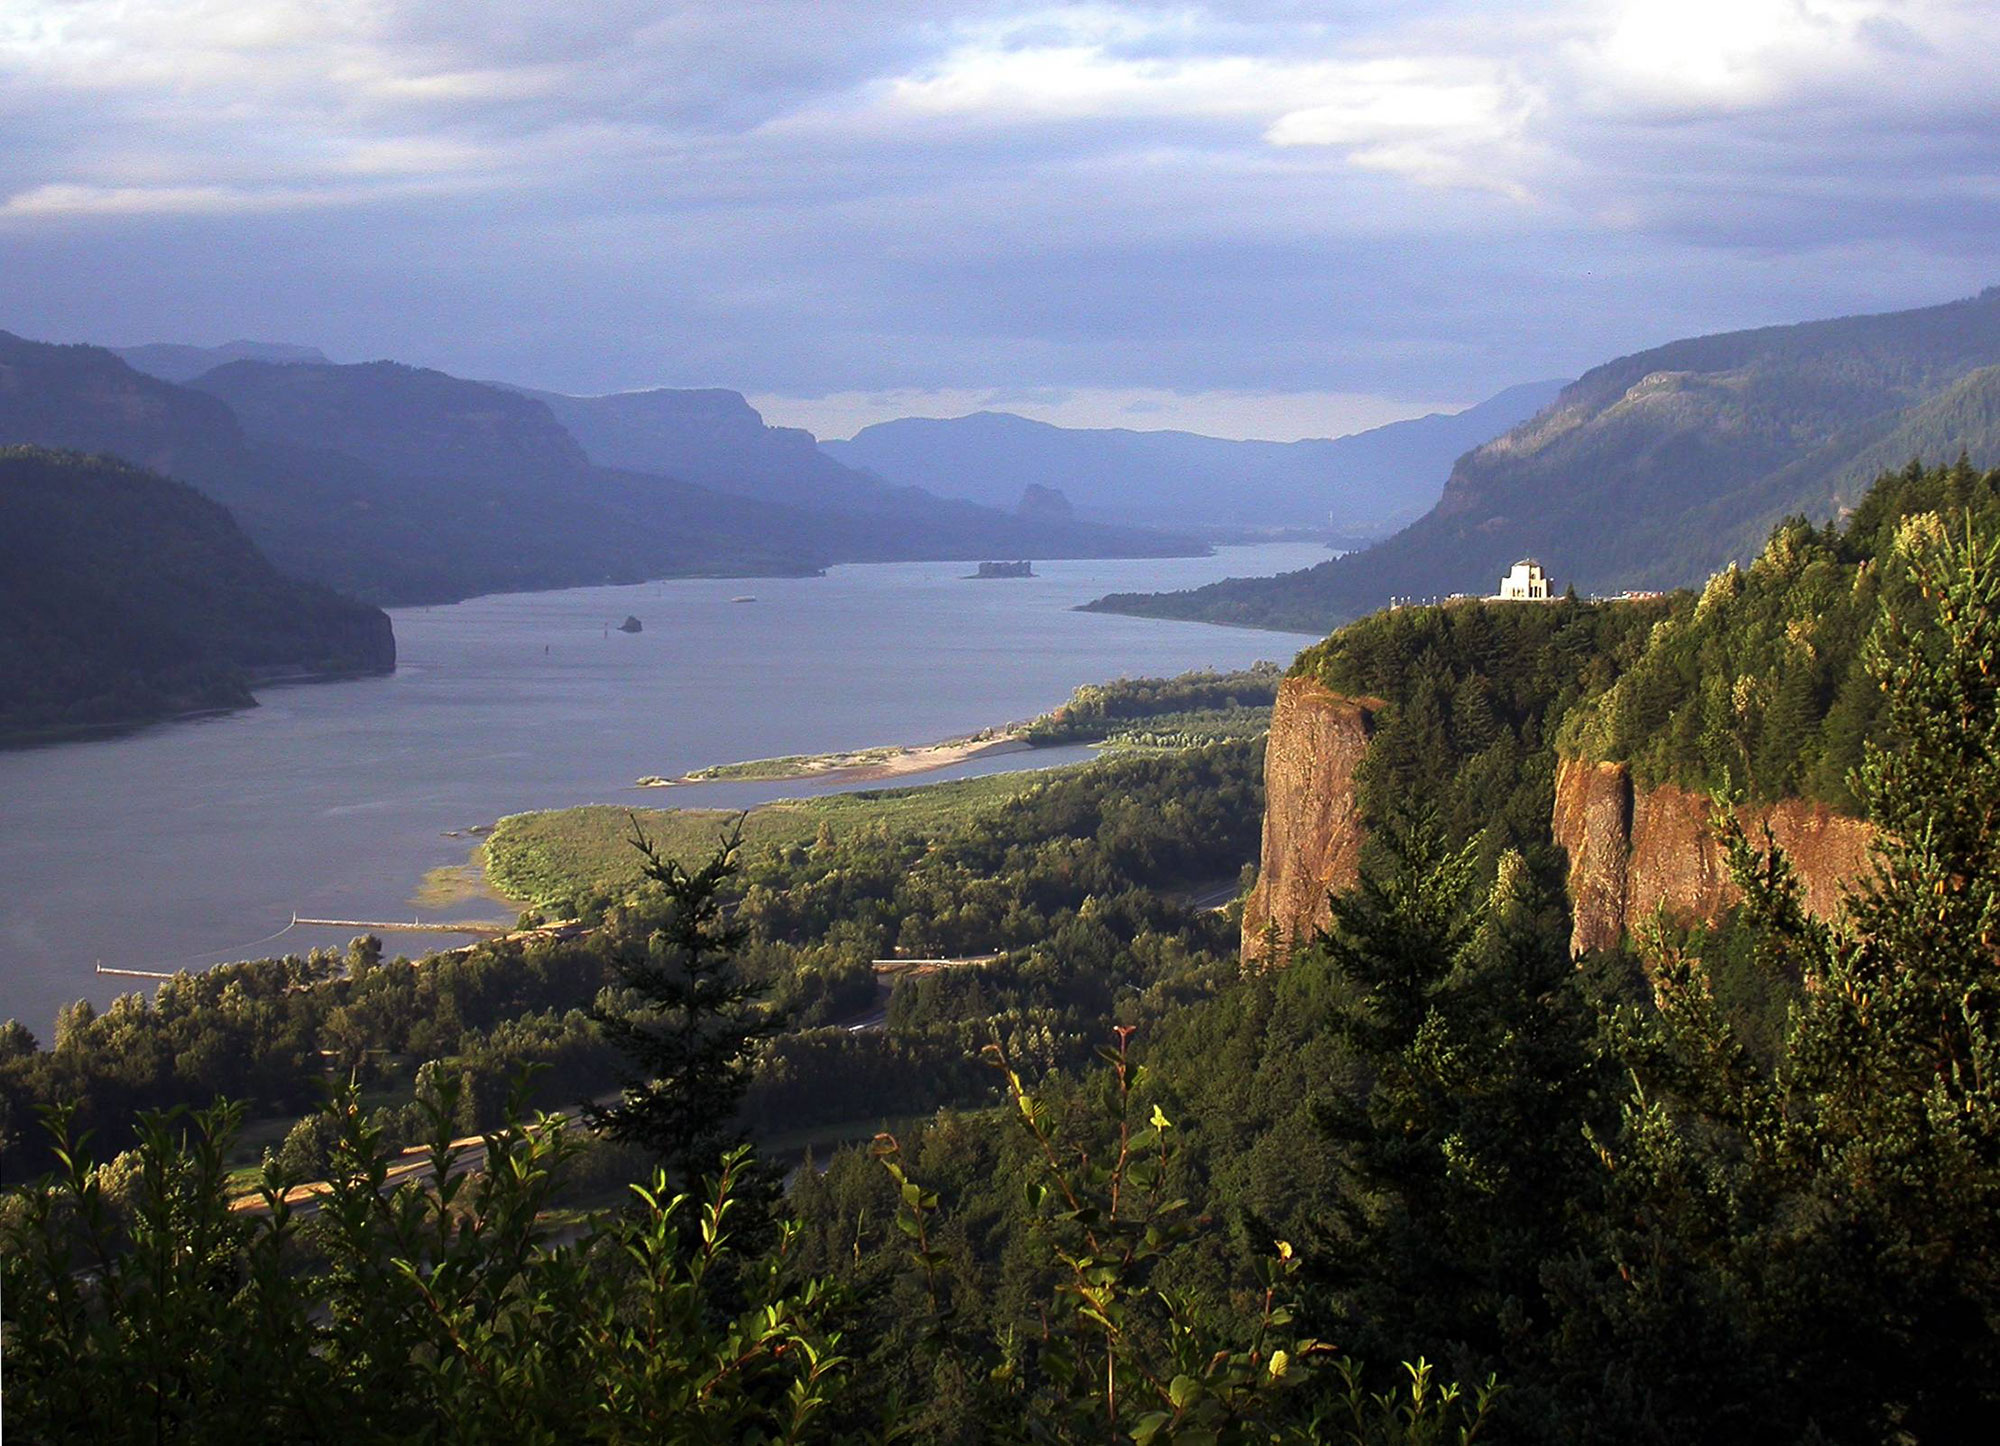 About the Columbia River, Columbia River